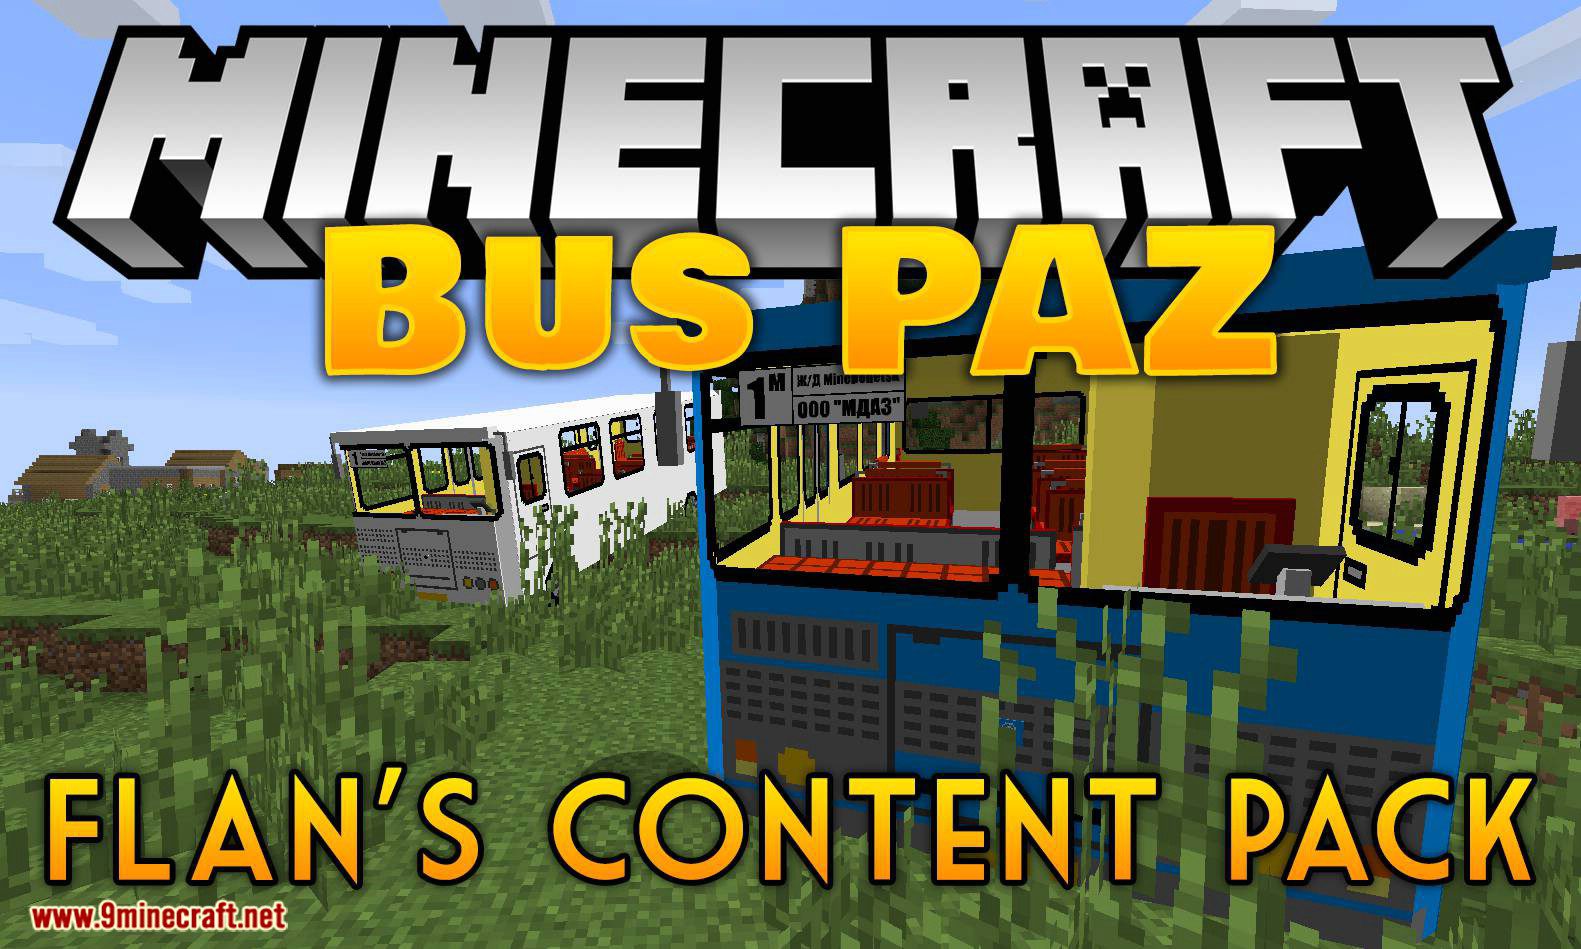 Flan_s Content Pack Bus PAZ mod for minecraft logo